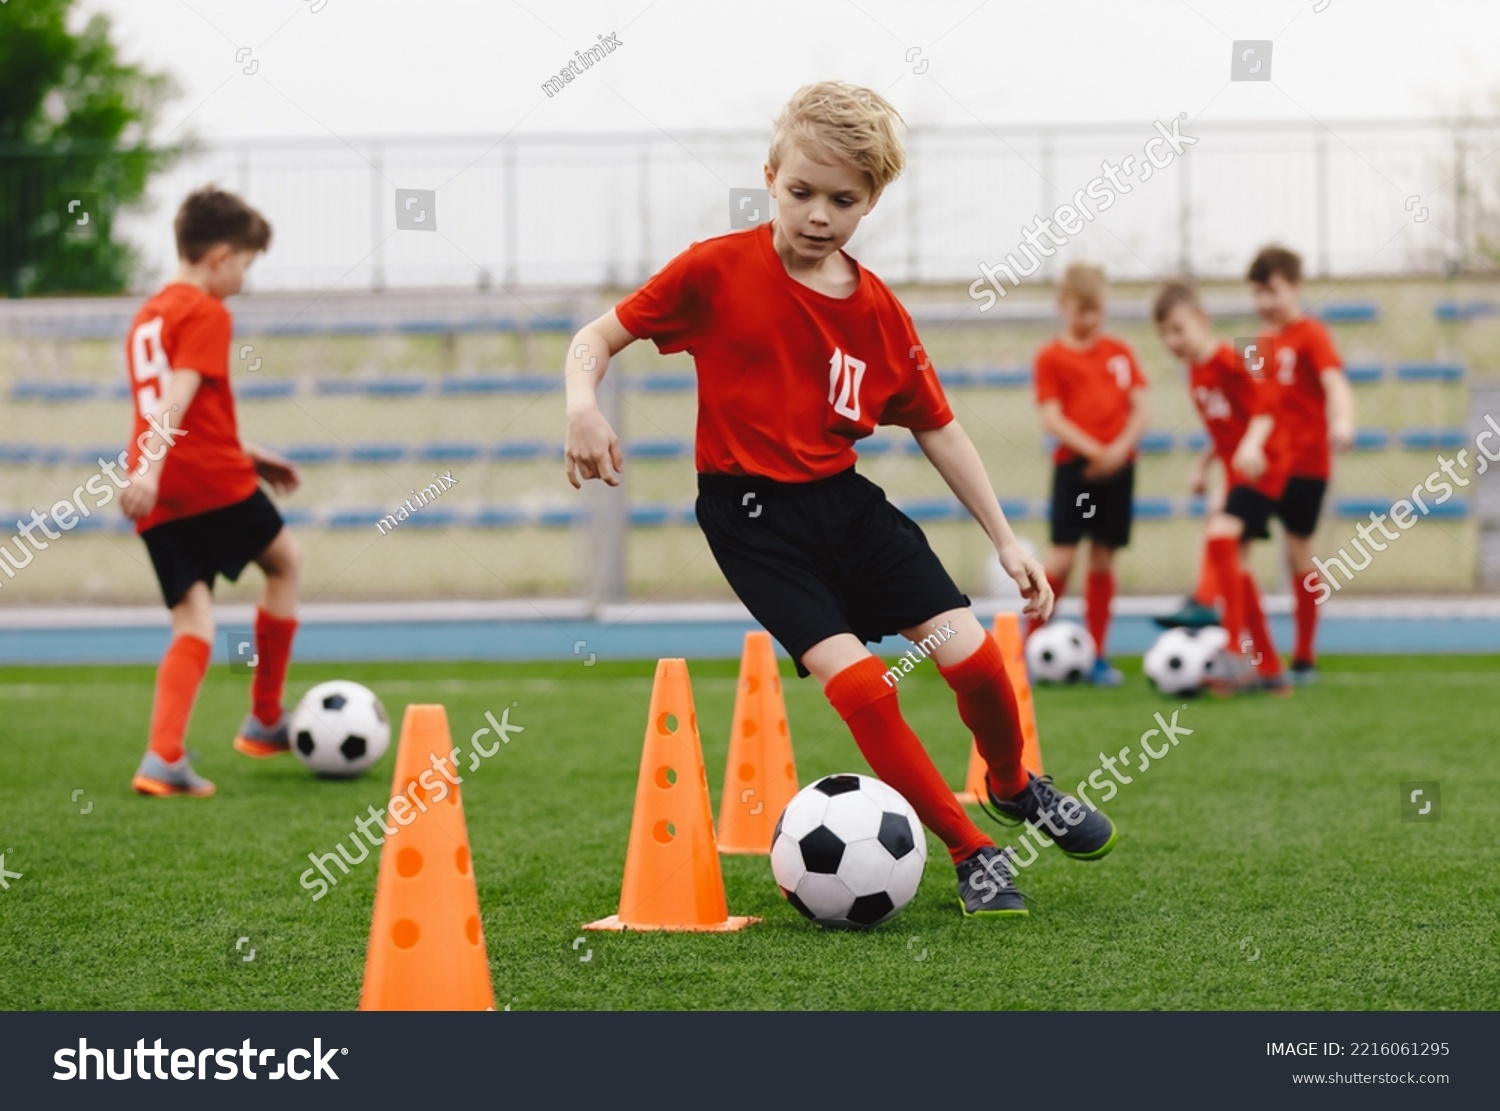 Boys on soccer football training. Young players dribble ball between training cones. Soccer summer training camp. Players on football practice session #2216061295